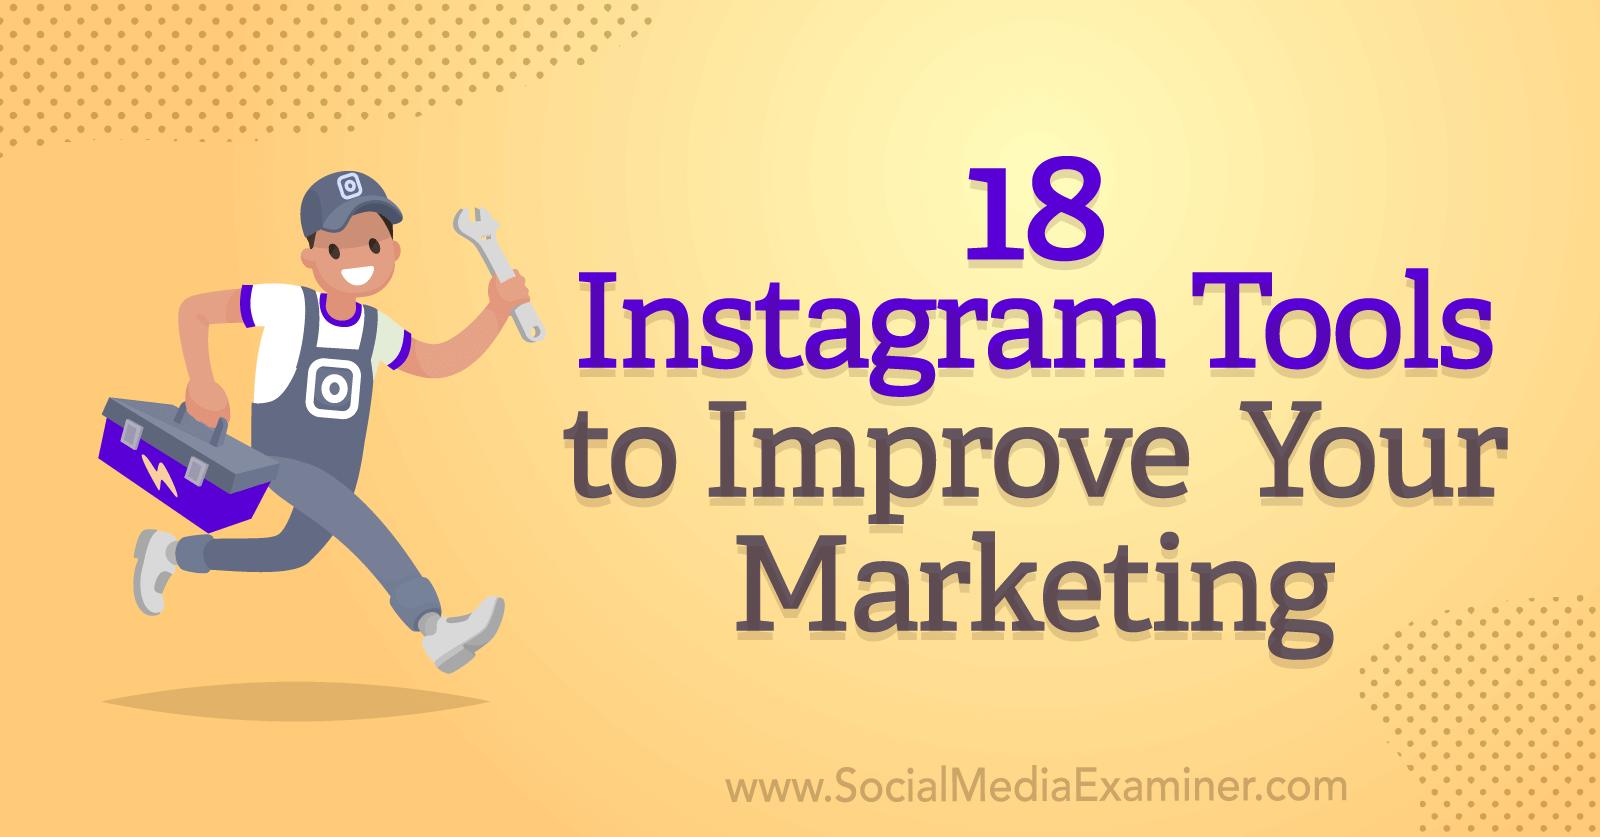 18 Instagram Tools to Improve Your Marketing by Anna Sonnenberg on Social Media Examiner.